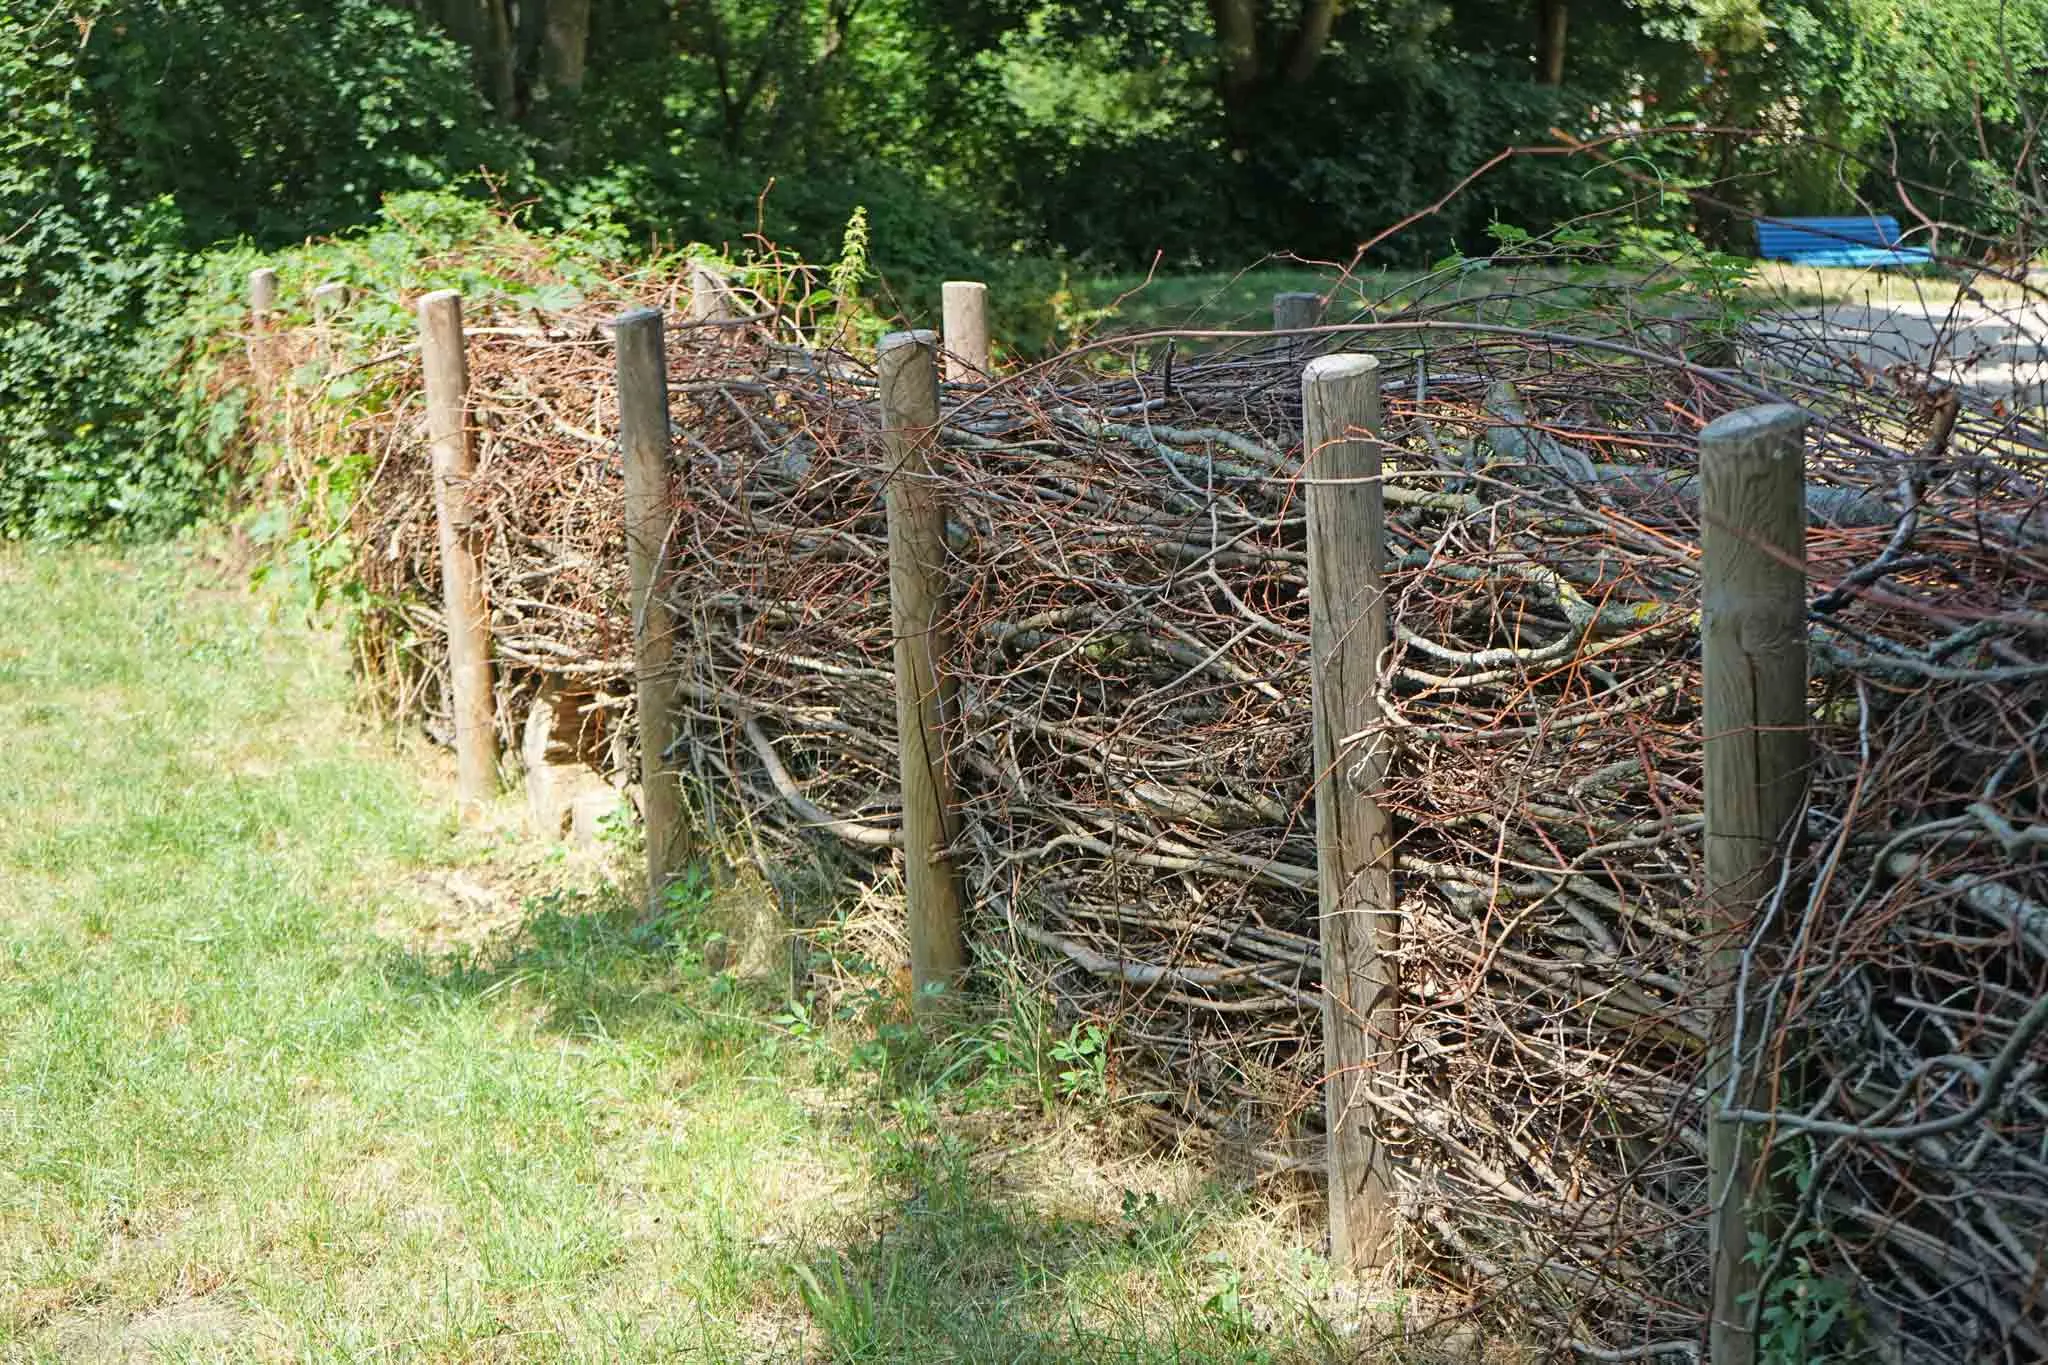 A natural barrier comprised of two lines of wooden posts, providing an outer structure which contains the layers of twigs and branches that have been sandwiched in the gap between them.